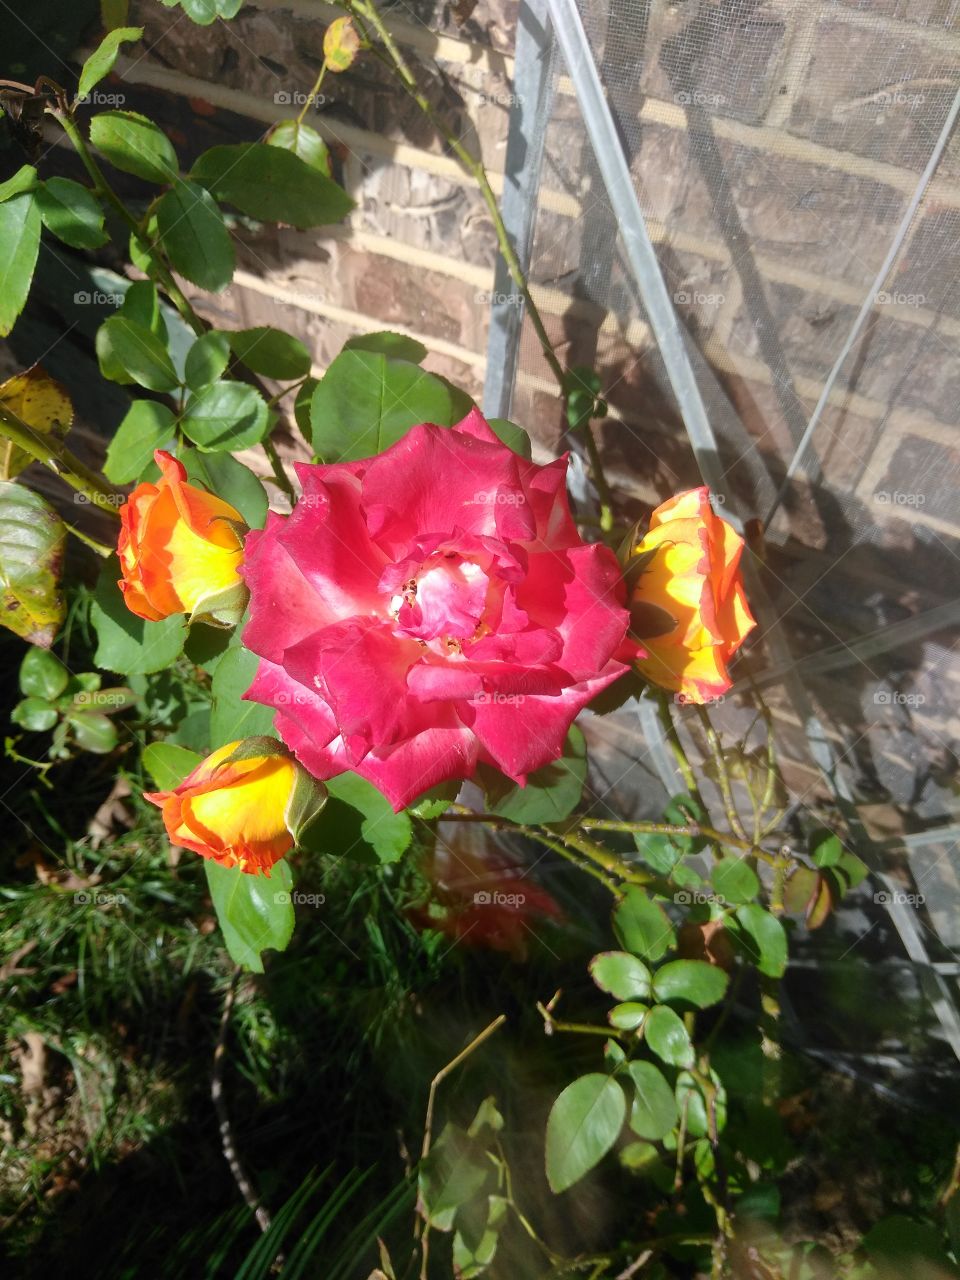 a pinkish rose with orangish reddish and yellowish roses growing around it and it's just so beautiful and inspiring